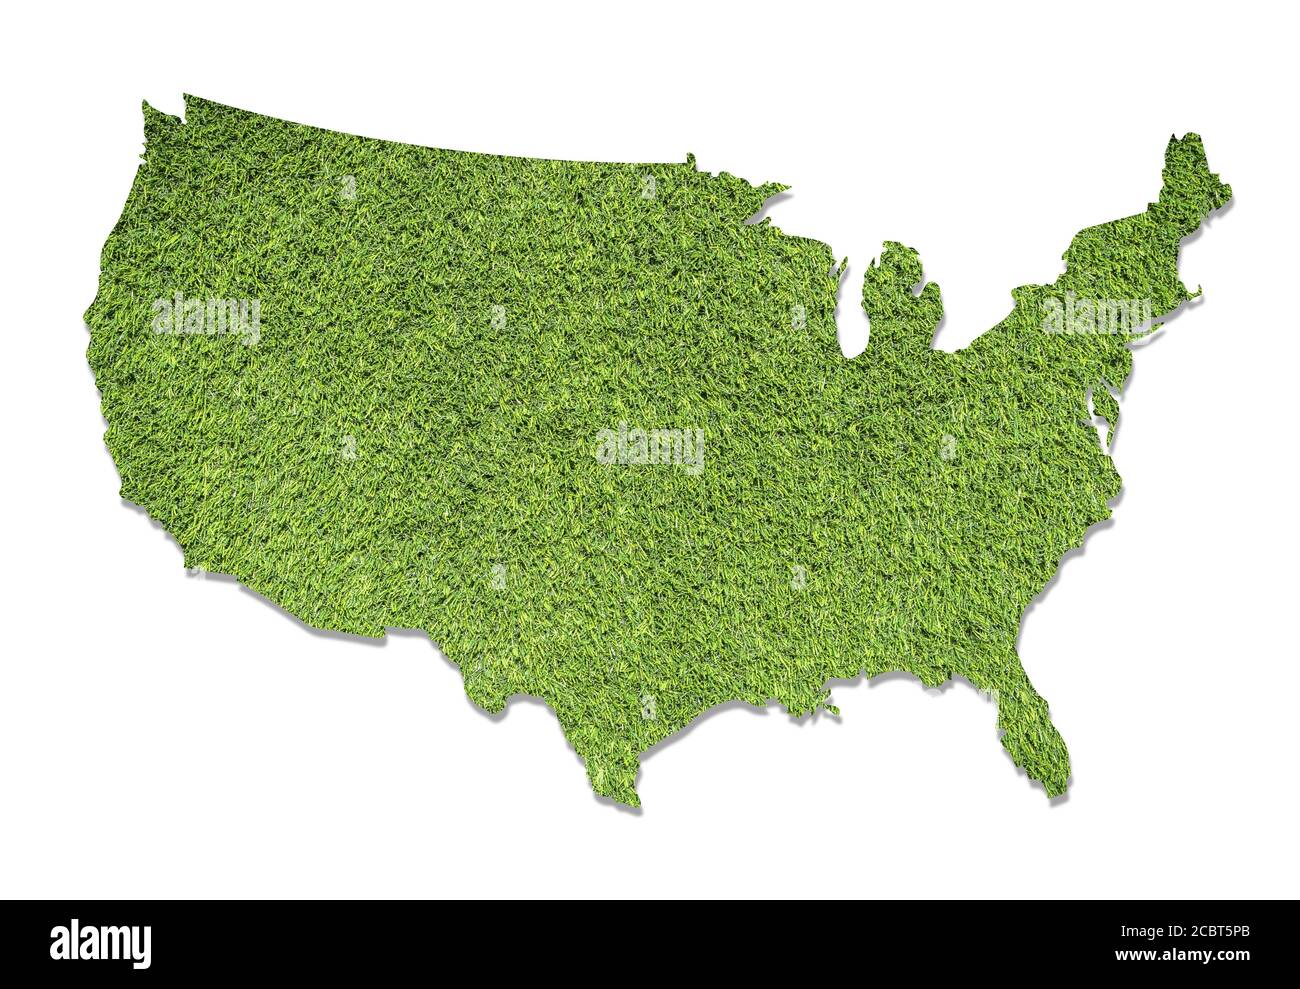 Geographic map of the United States of America with green grass texture. The shape of America's borders as ecological symbol. Stock Vector